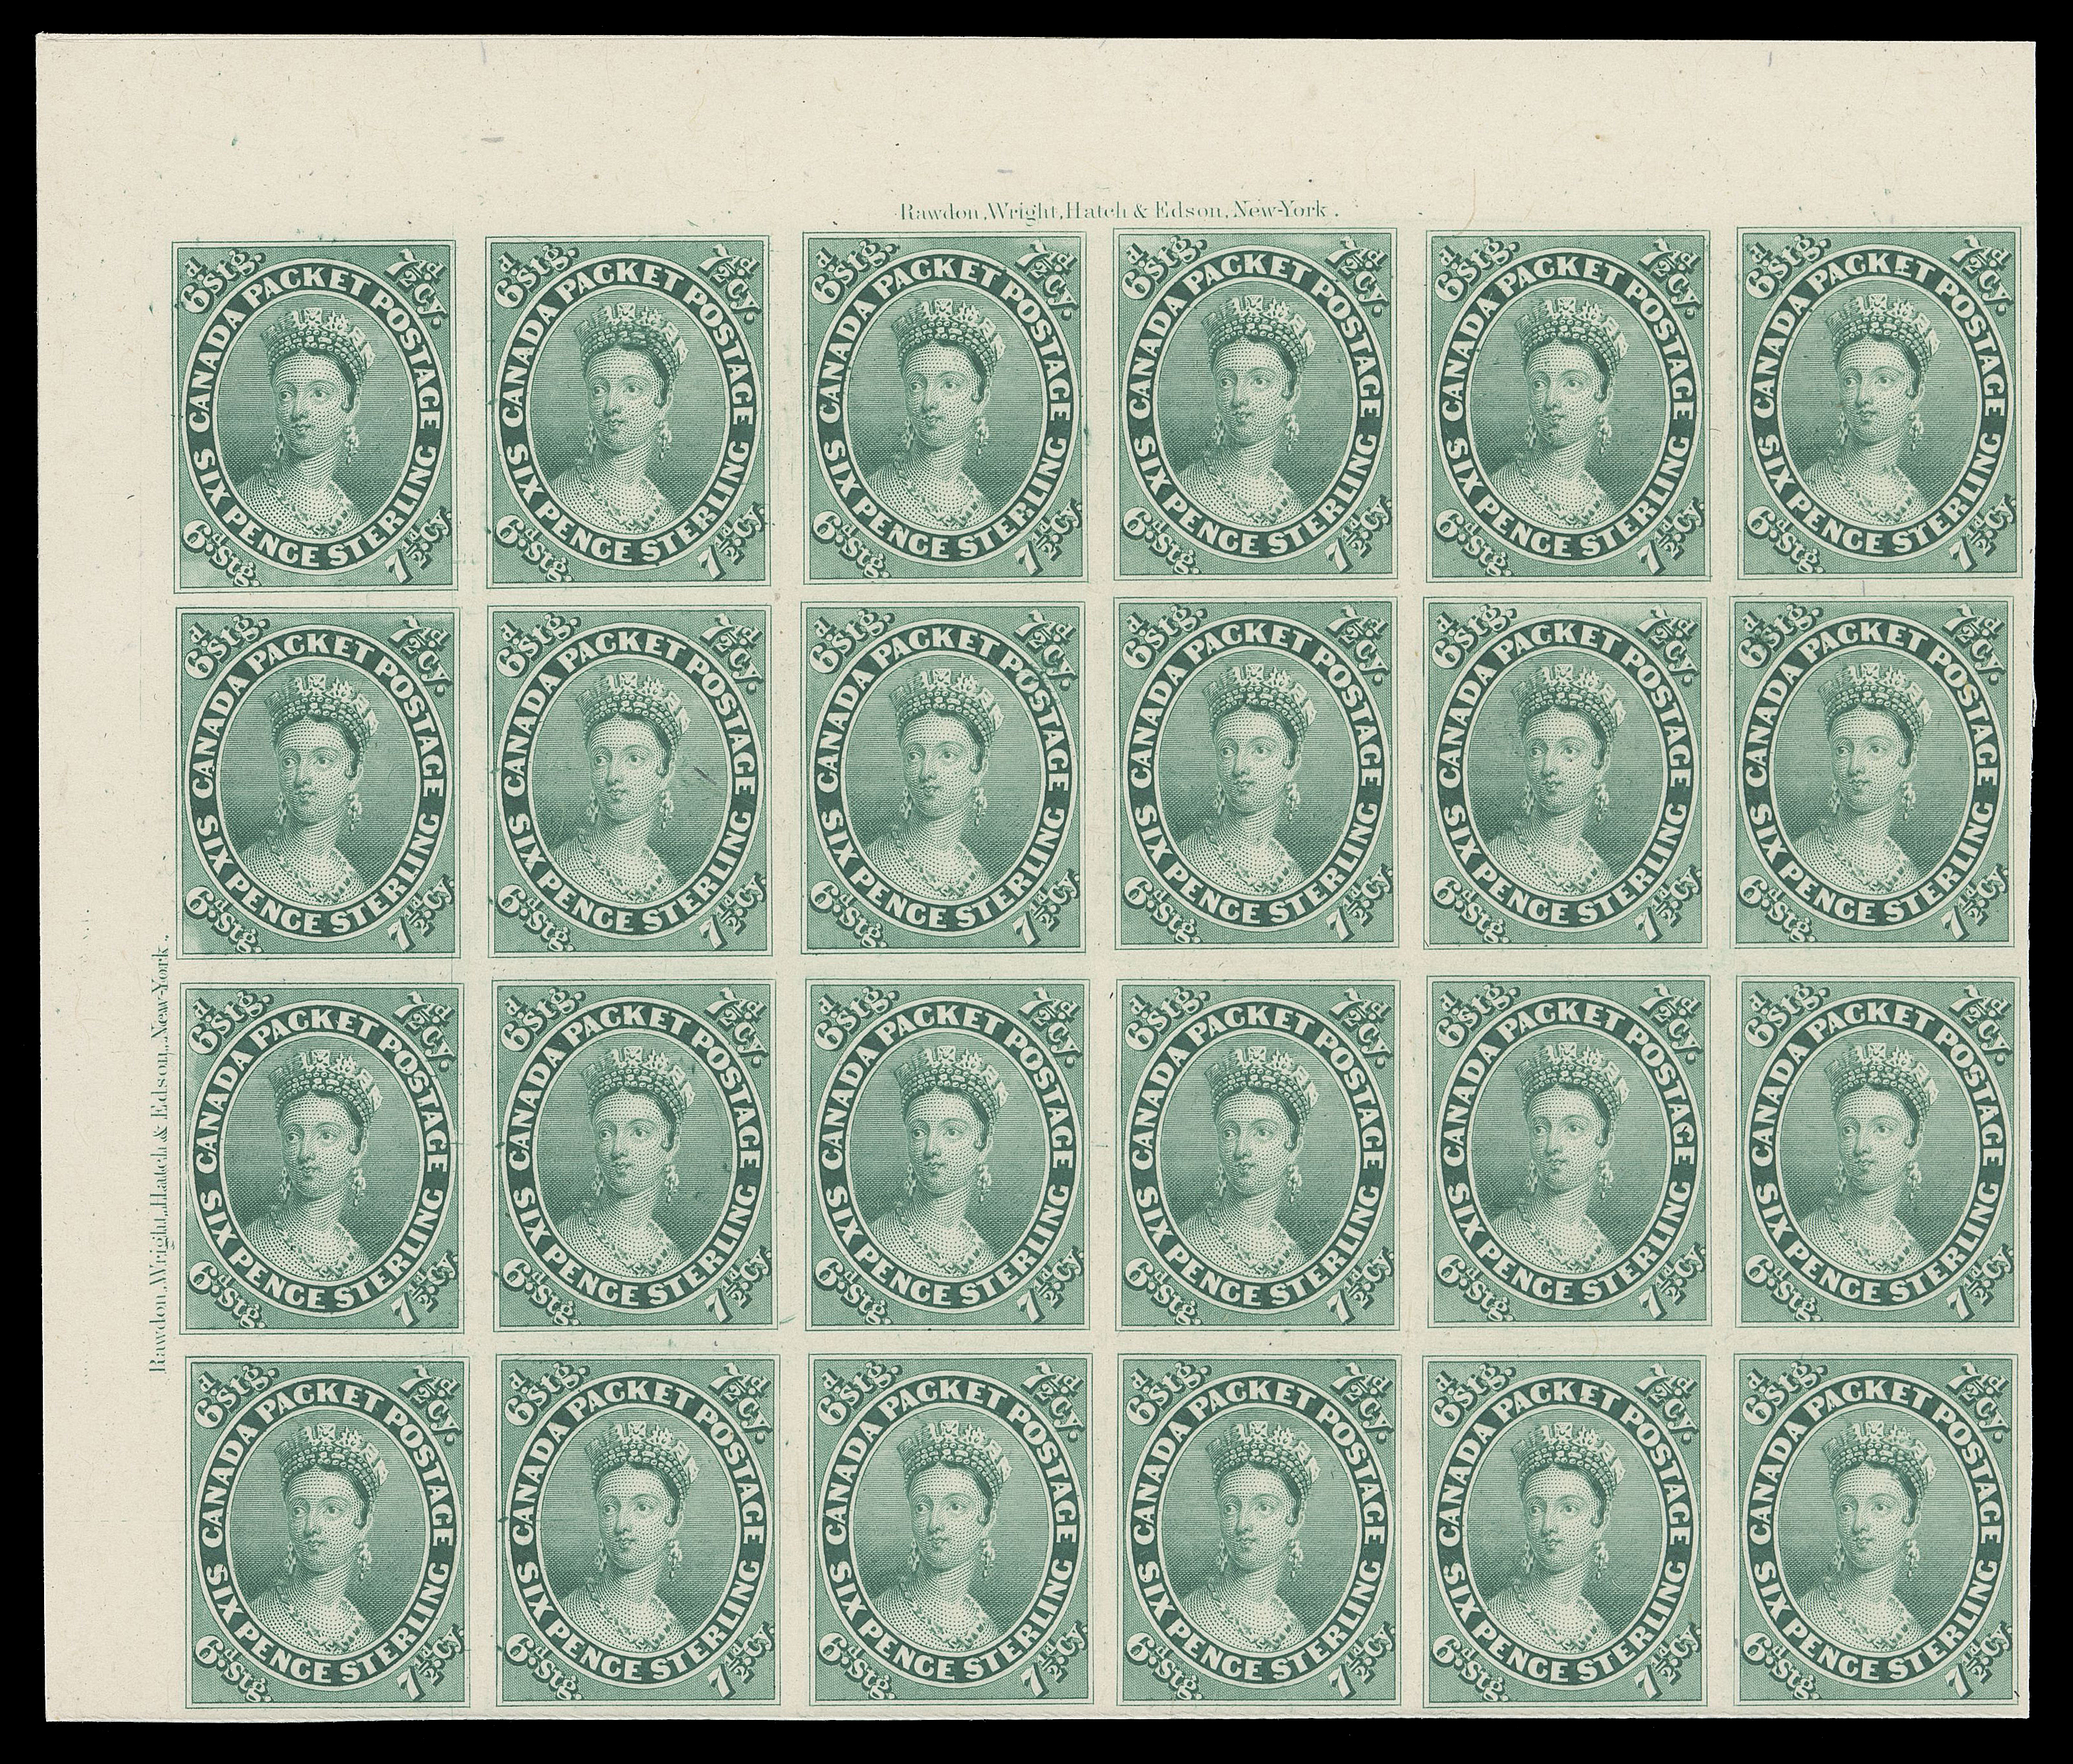 SEVEN AND ONE HALF PENCE AND TWELVE AND ONE HALF CENTS  9P,Upper left corner margin plate proof block of 24 (6x4) in the issued colour on card mounted india paper; light diagonal crease on top left pair, otherwise brilliant fresh and choice, VF (Unitrade cat. $8,400)

An interesting "Left Frame" plate flaw is visible on all four stamps in the second column.